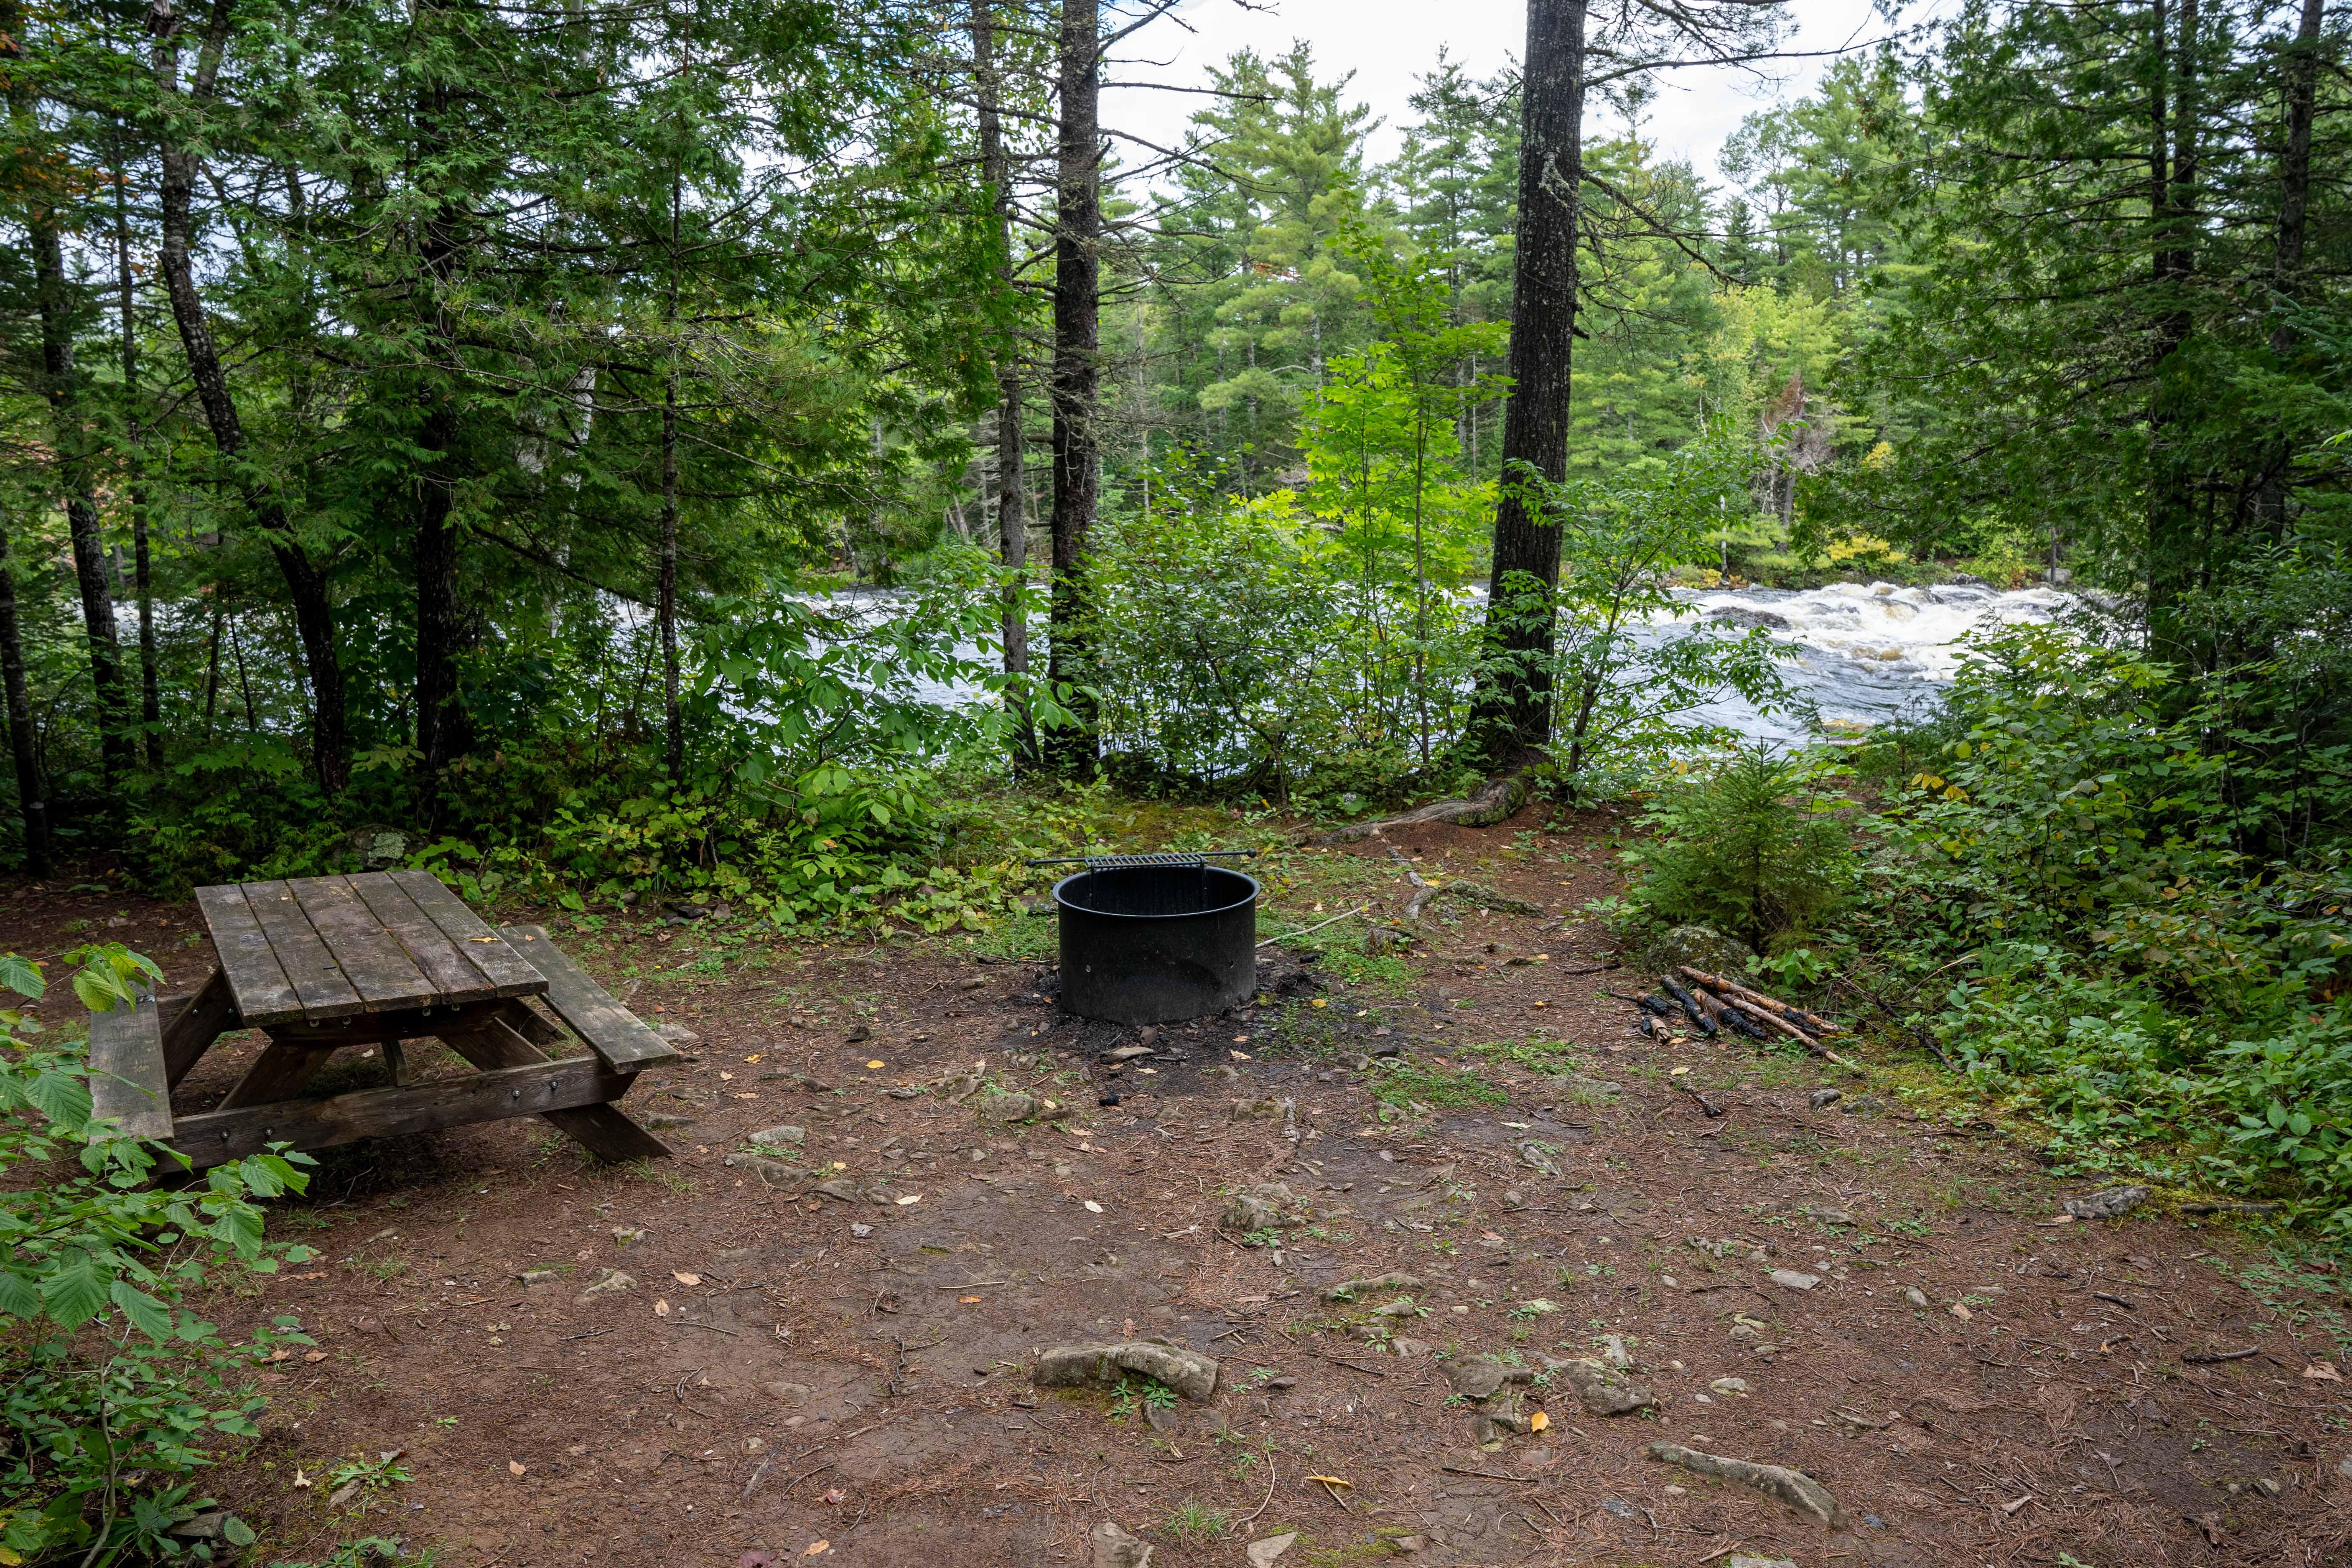 Picnic table and firepit surrounded by forest with river and waterfall in background.